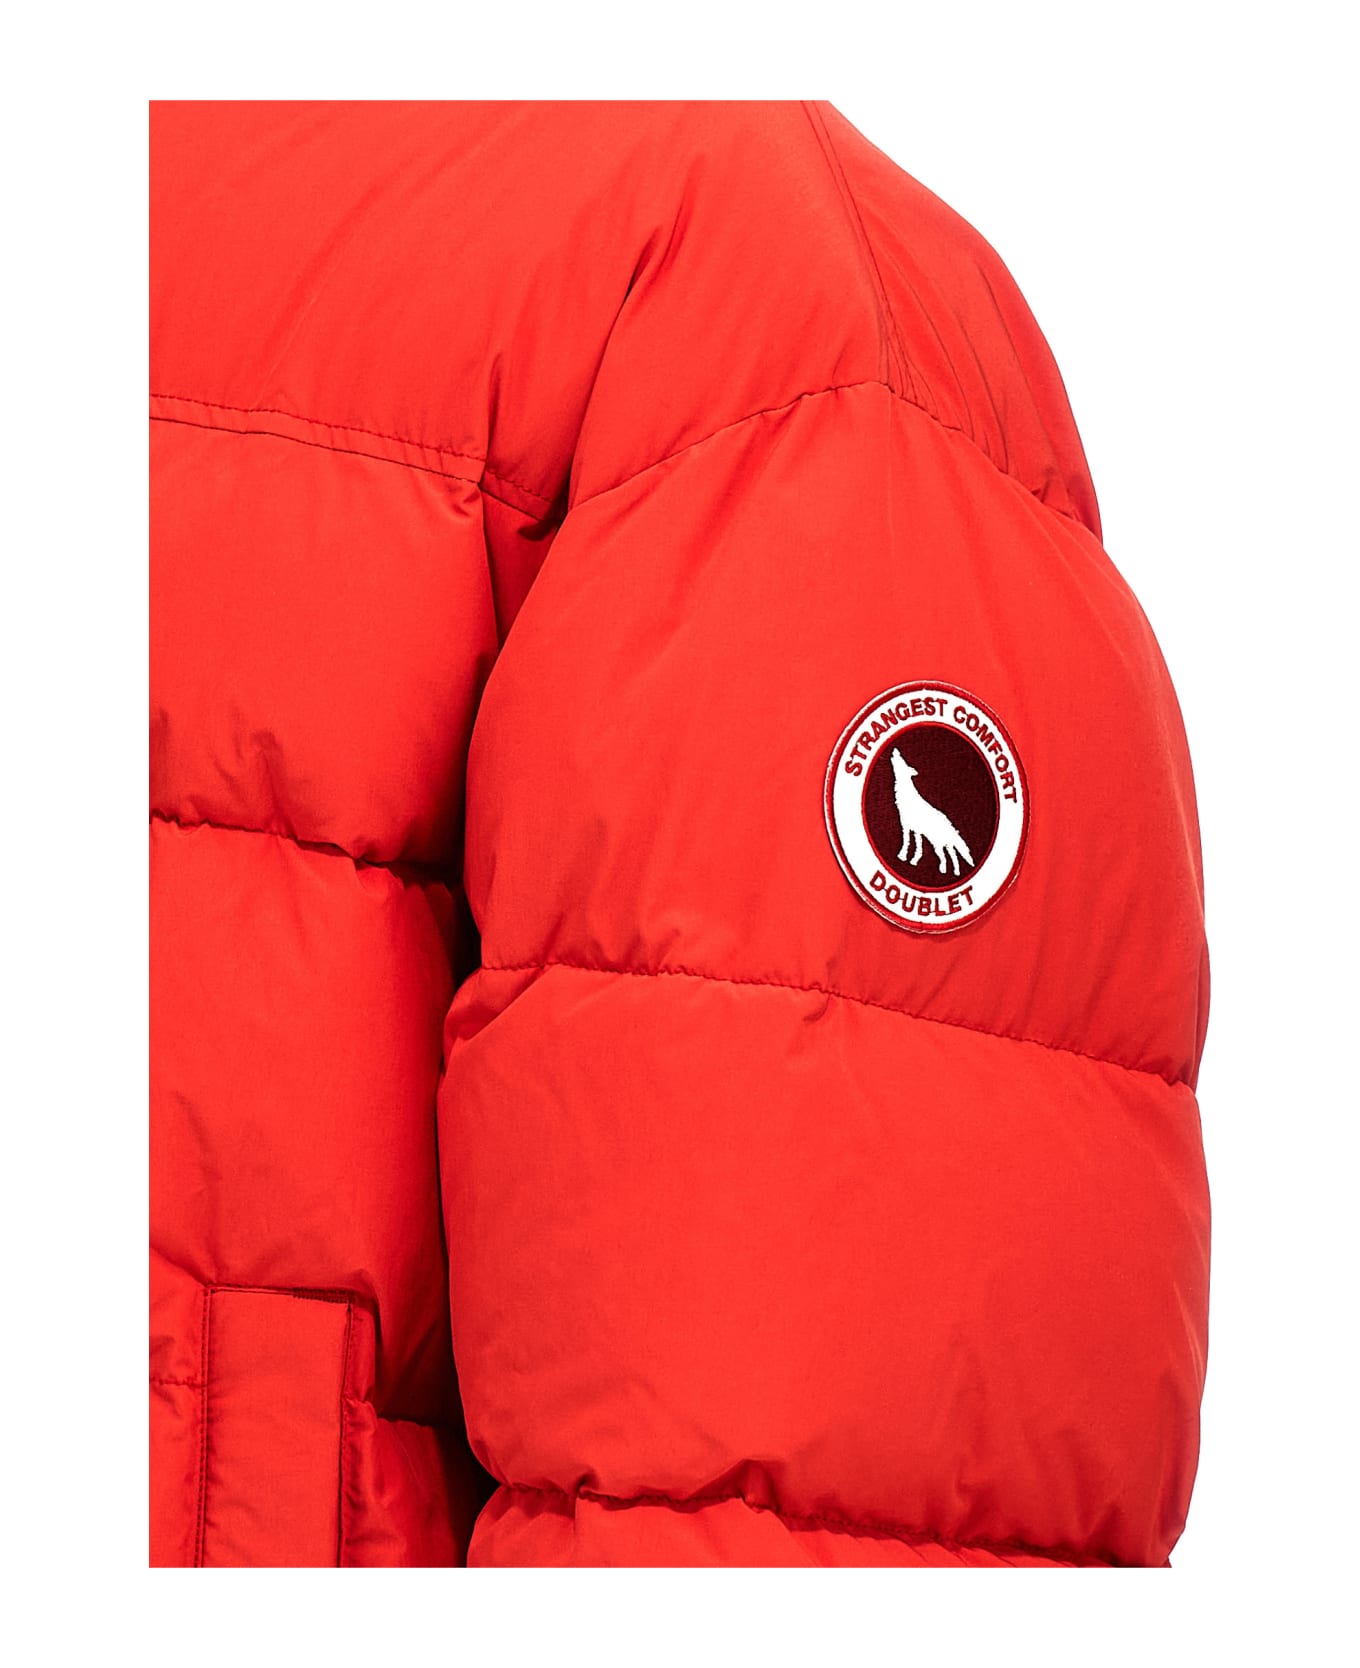 doublet 'animal Trim' Down Jacket - Red